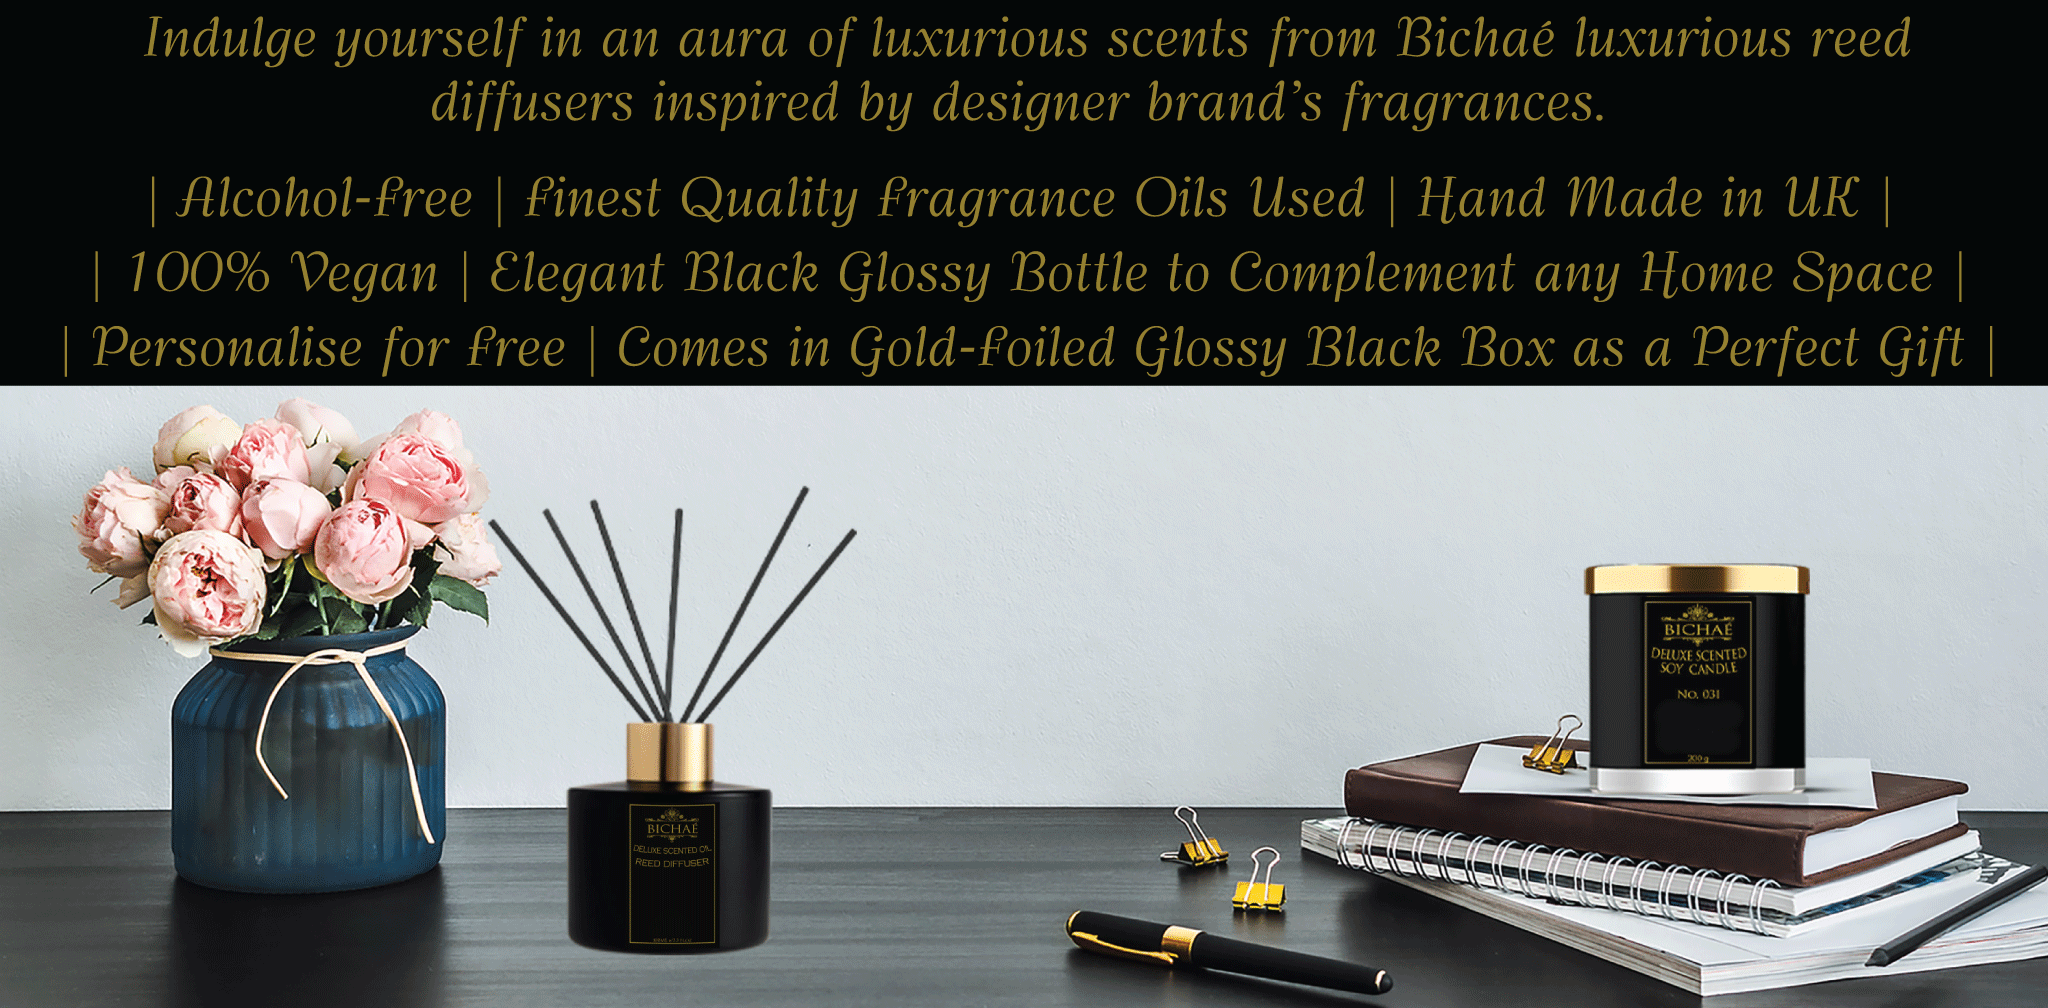 Bichae deluxe reed diffuser collection page image